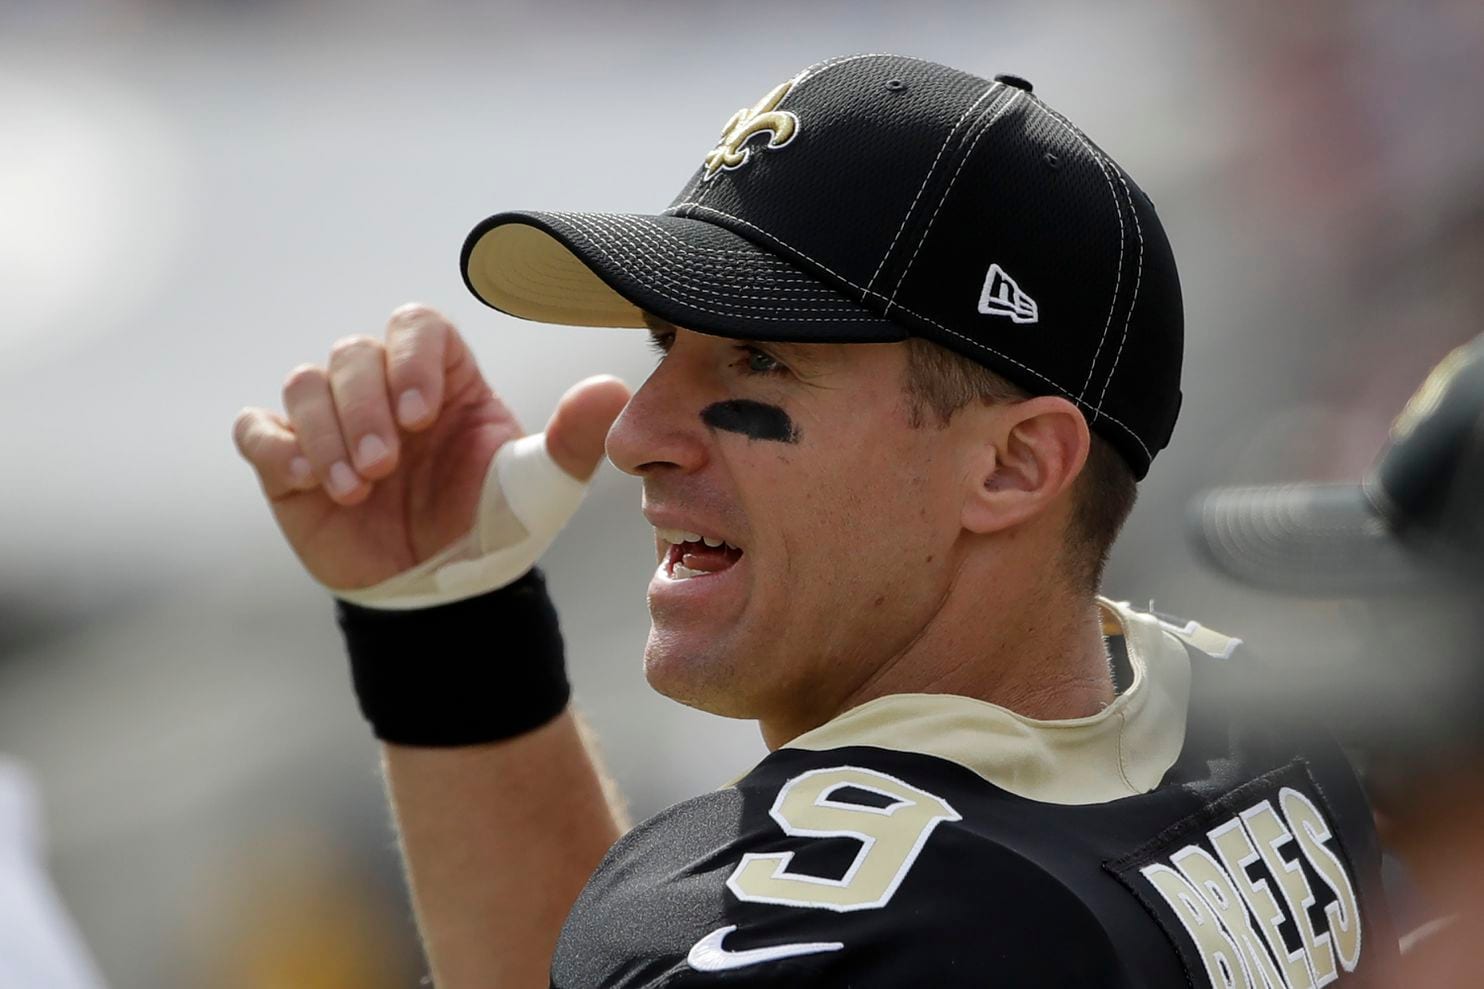 Drew Brees has Recovered from Thumb Injury